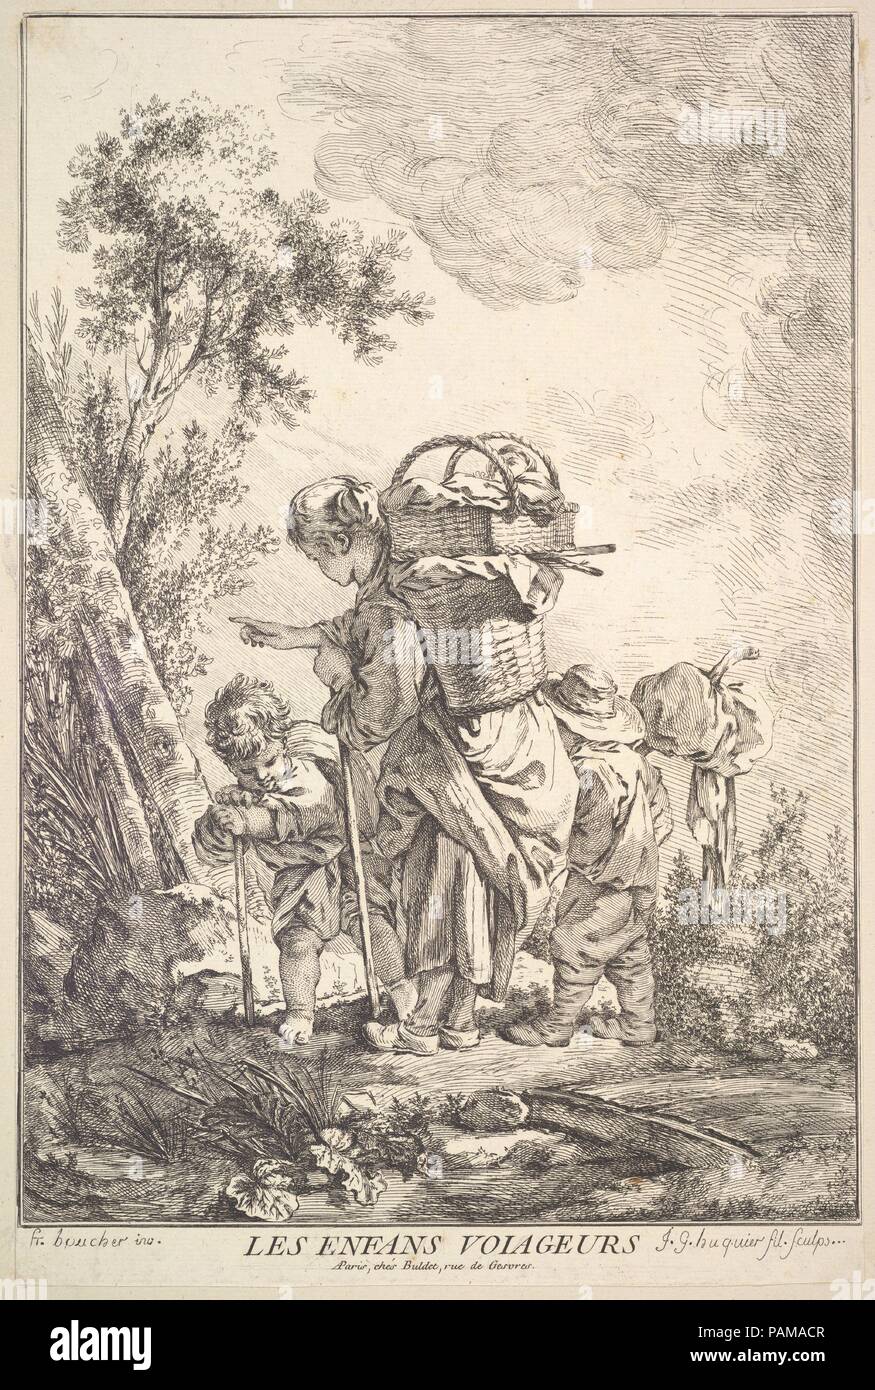 The Traveling Children. Artist: After François Boucher (French, Paris 1703-1770 Paris); Jacques Gabriel Huquier (French, Paris 1730-1805 Shrewsbury). Dimensions: Sheet (trimmed): 12 7/16 × 8 3/8 in. (31.6 × 21.2 cm). Date: mid to late 18th century. Museum: Metropolitan Museum of Art, New York, USA. Stock Photo